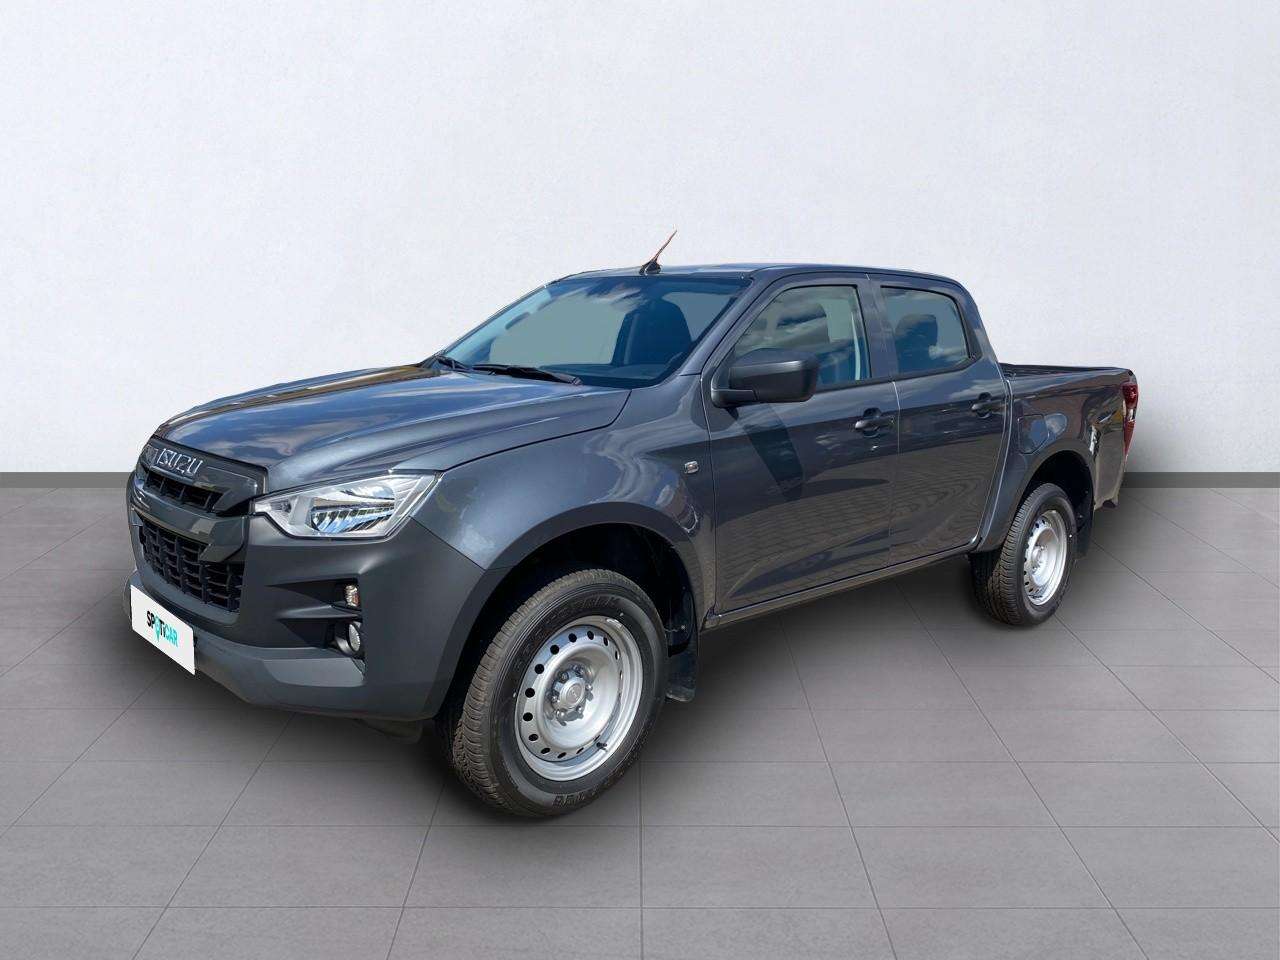 Isuzu D-Max Off-Road/Pick-up in Grey new in Vacha for € 37,990.-